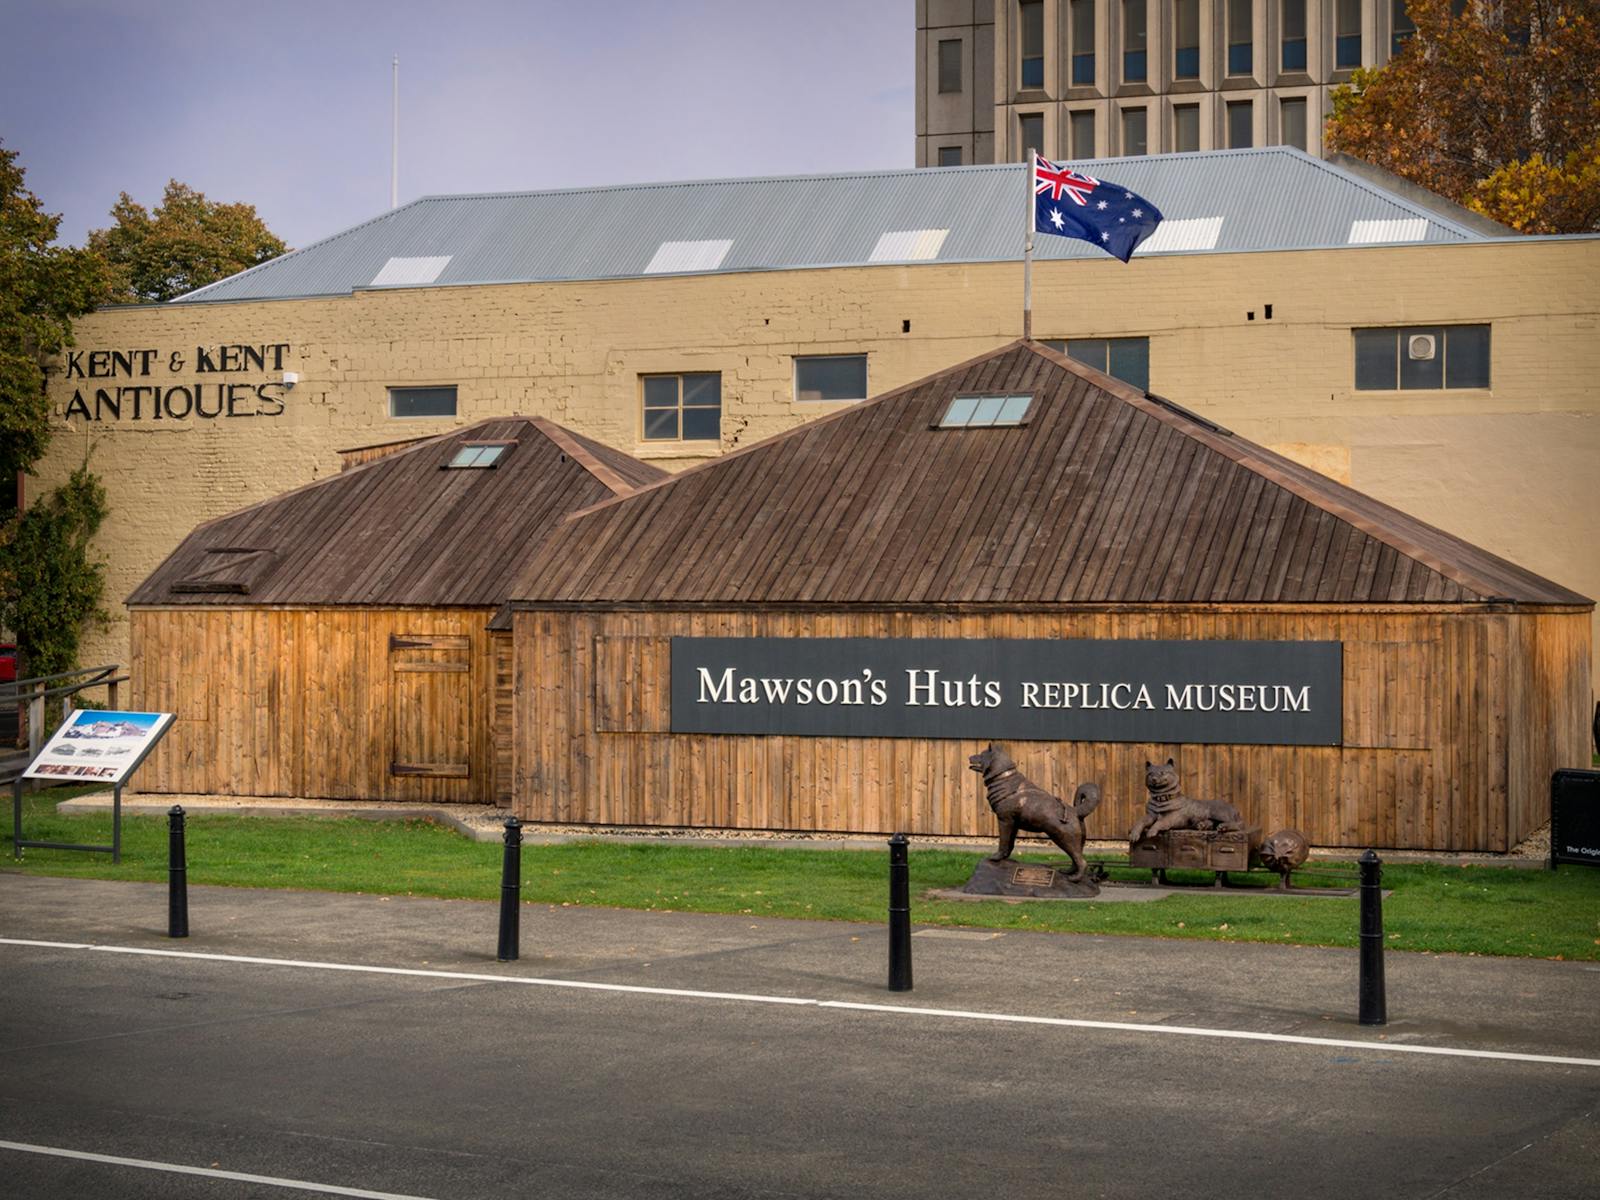 Recent image of the Mawson's Huts Replica Museum with sled dogs statue